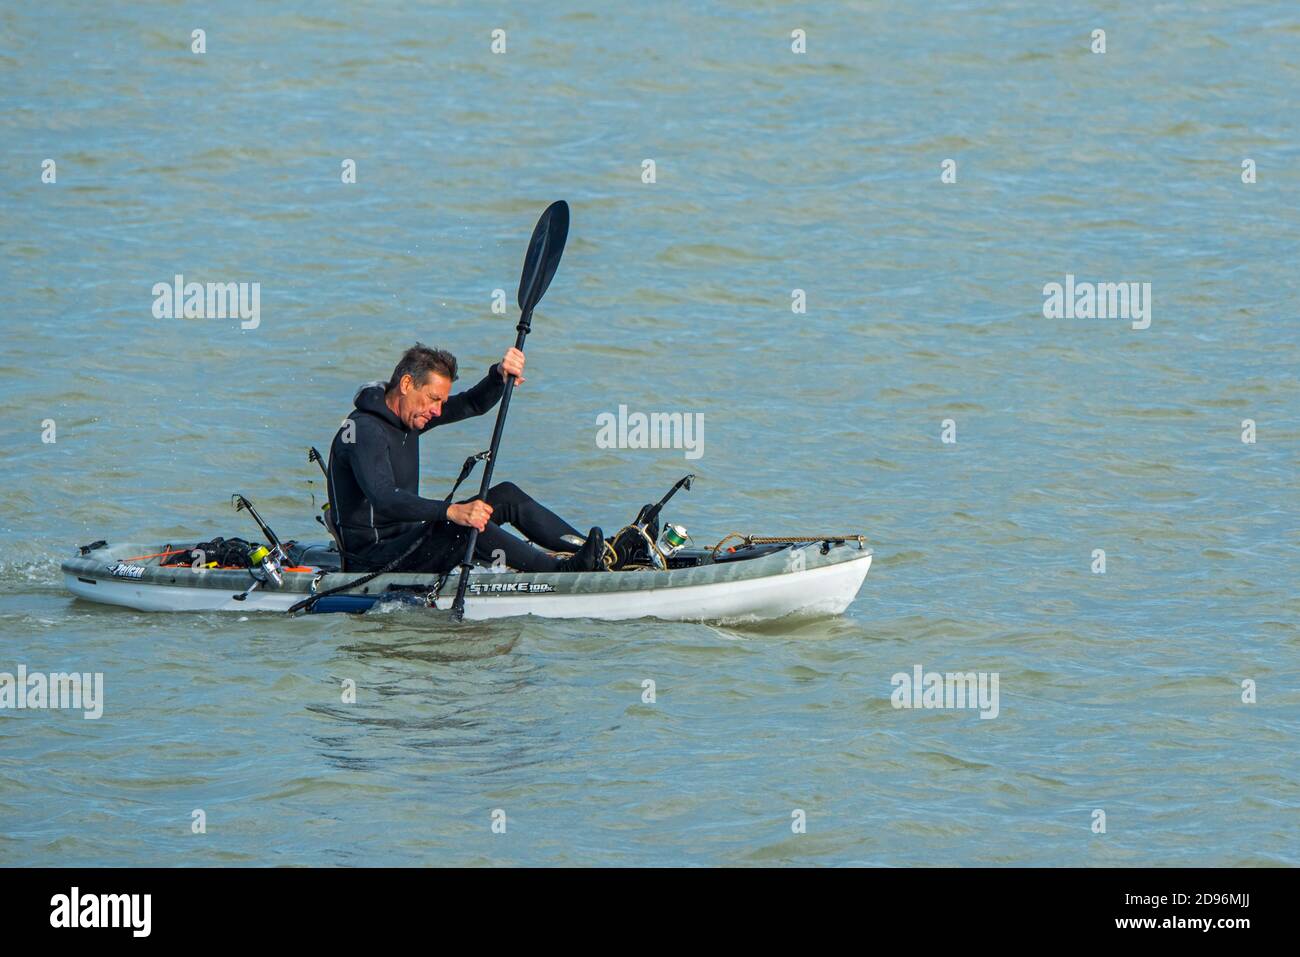 Sea angler in wetsuit paddling on the North Sea in Pelican Strike 100X Angler Kayak Stock Photo